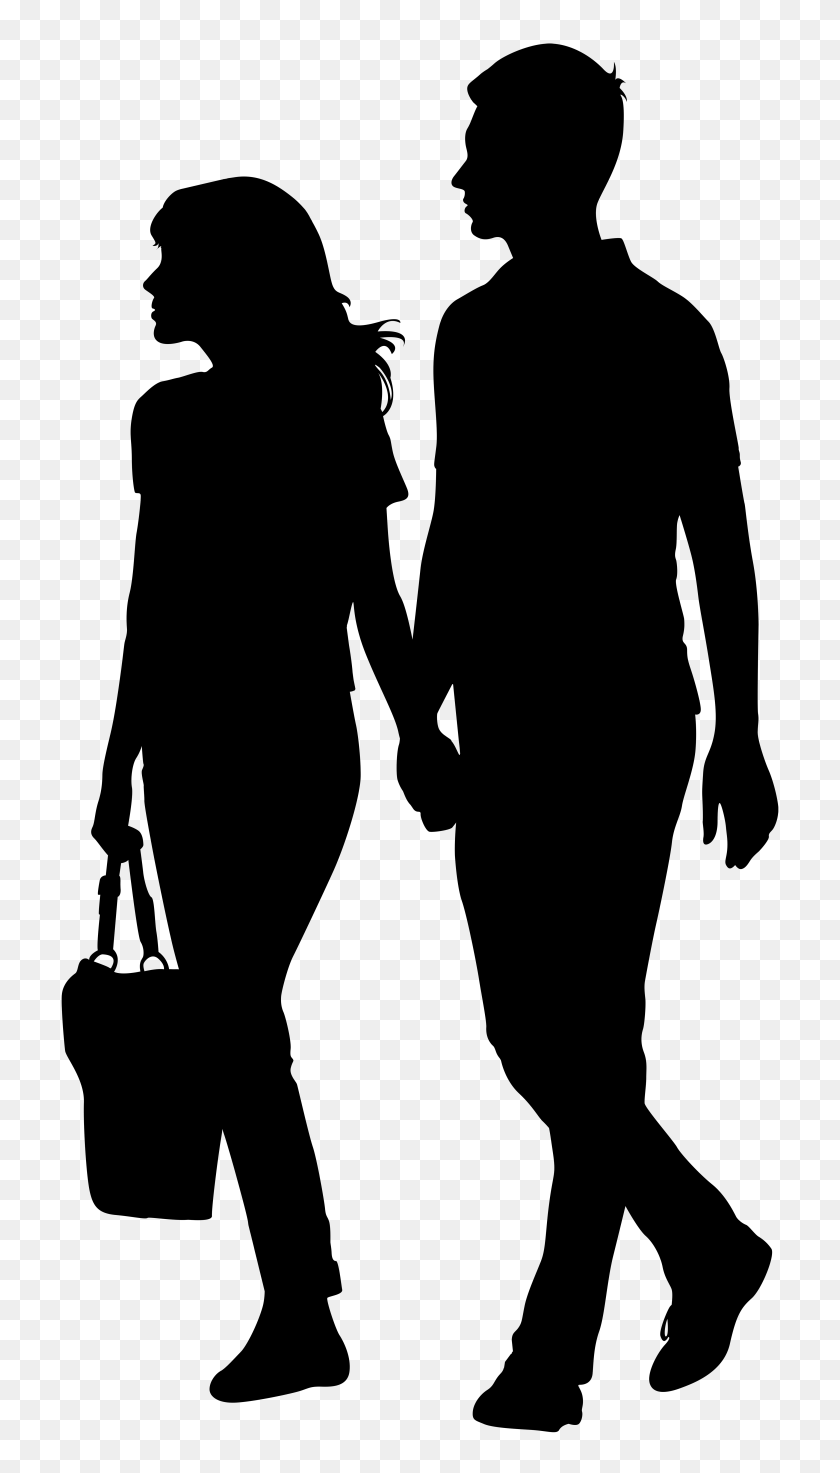 4416x8000 Couple Silhouette Holding Hands Png For Free Download On Ya - People Walking Silhouette PNG